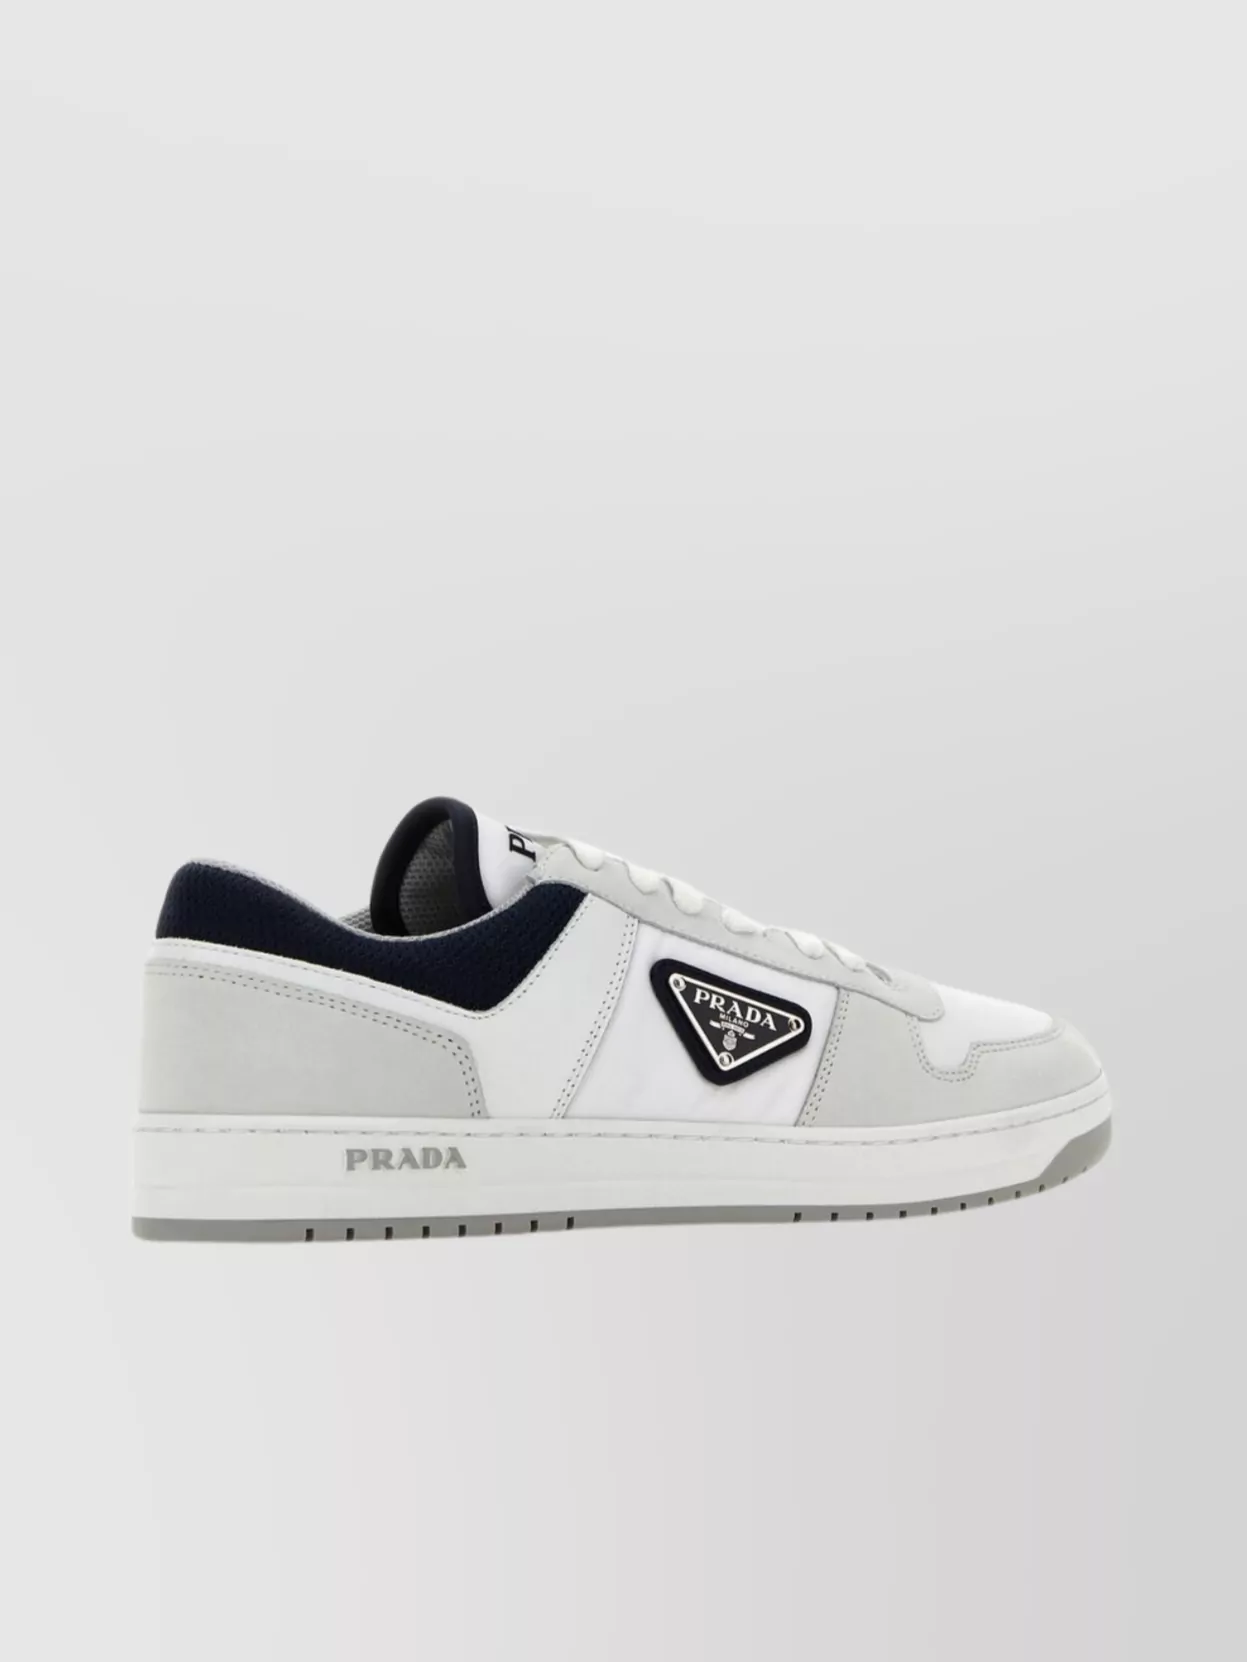 Prada Multicolor Re-nylon And Nubuck Downtown Sneakers In Biancooltremare